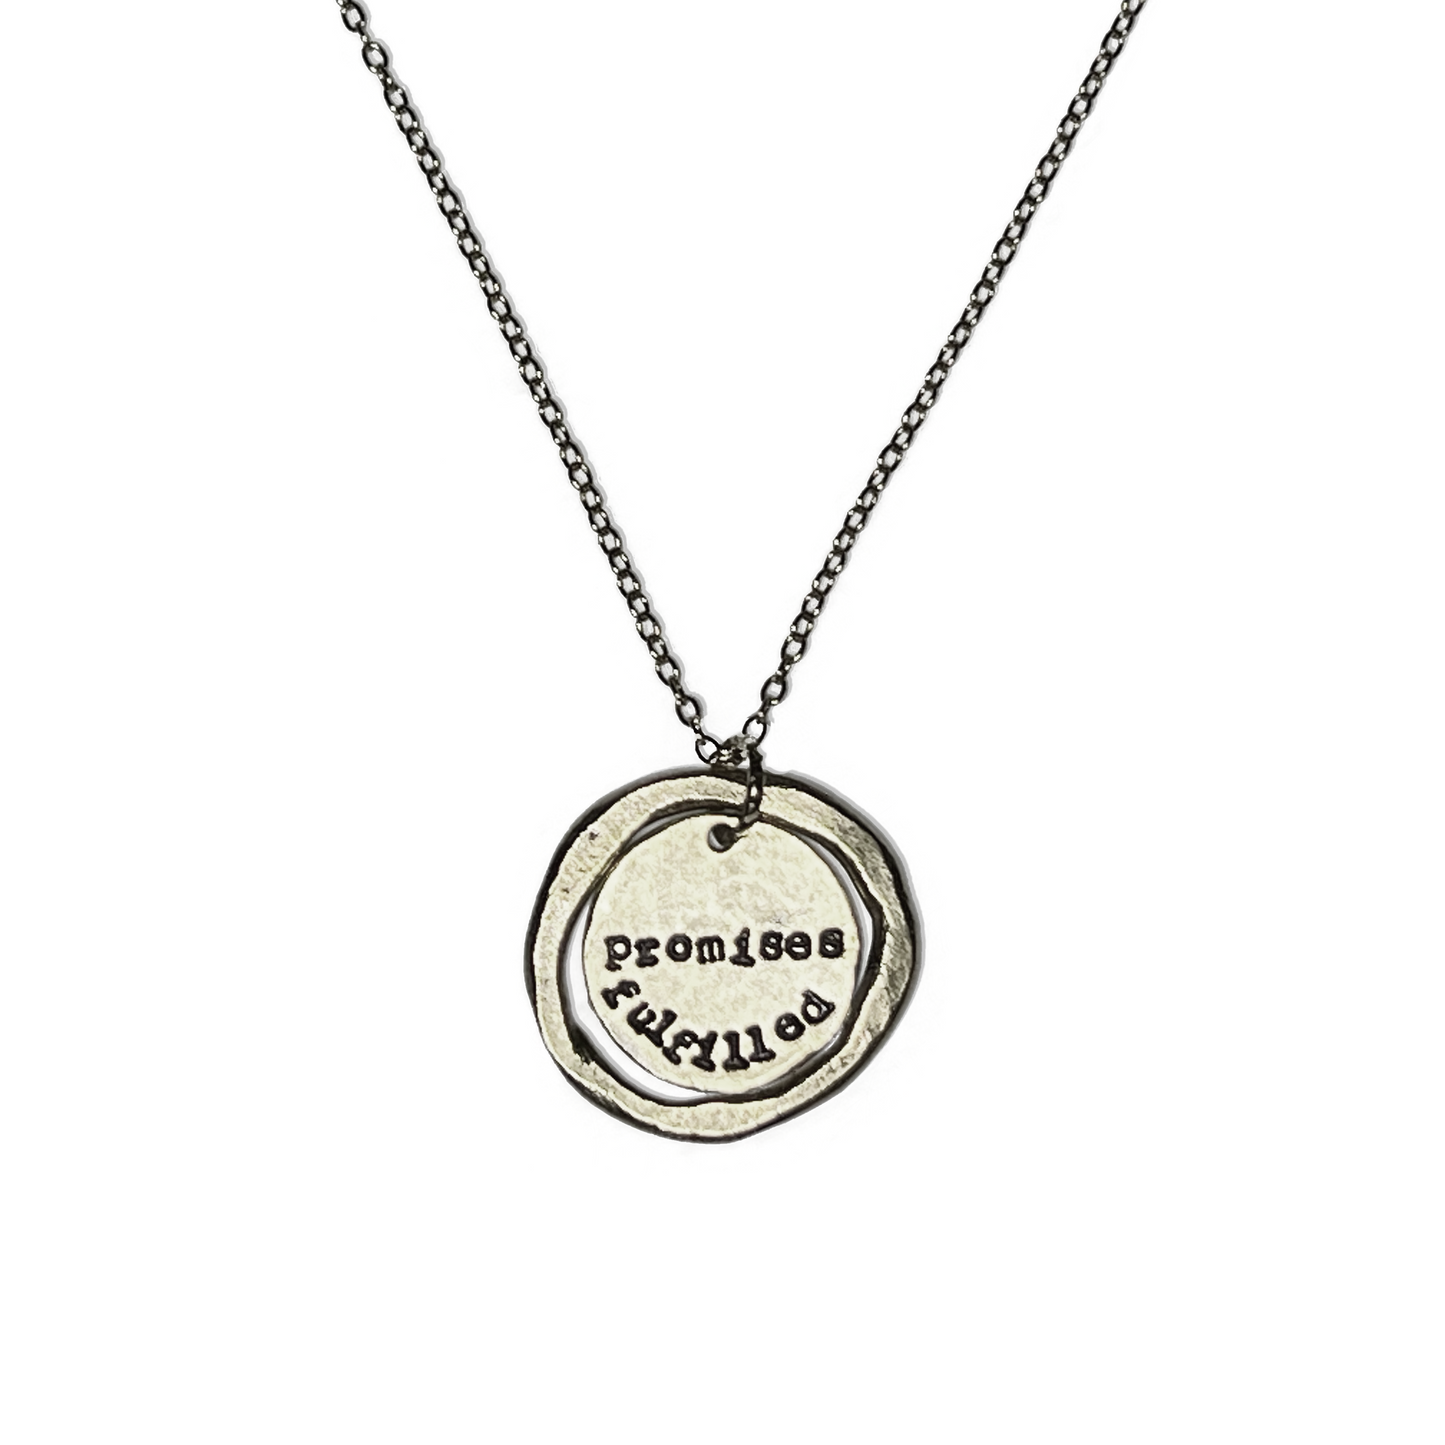 Load image into Gallery viewer, Promises Fulfilled Necklace
